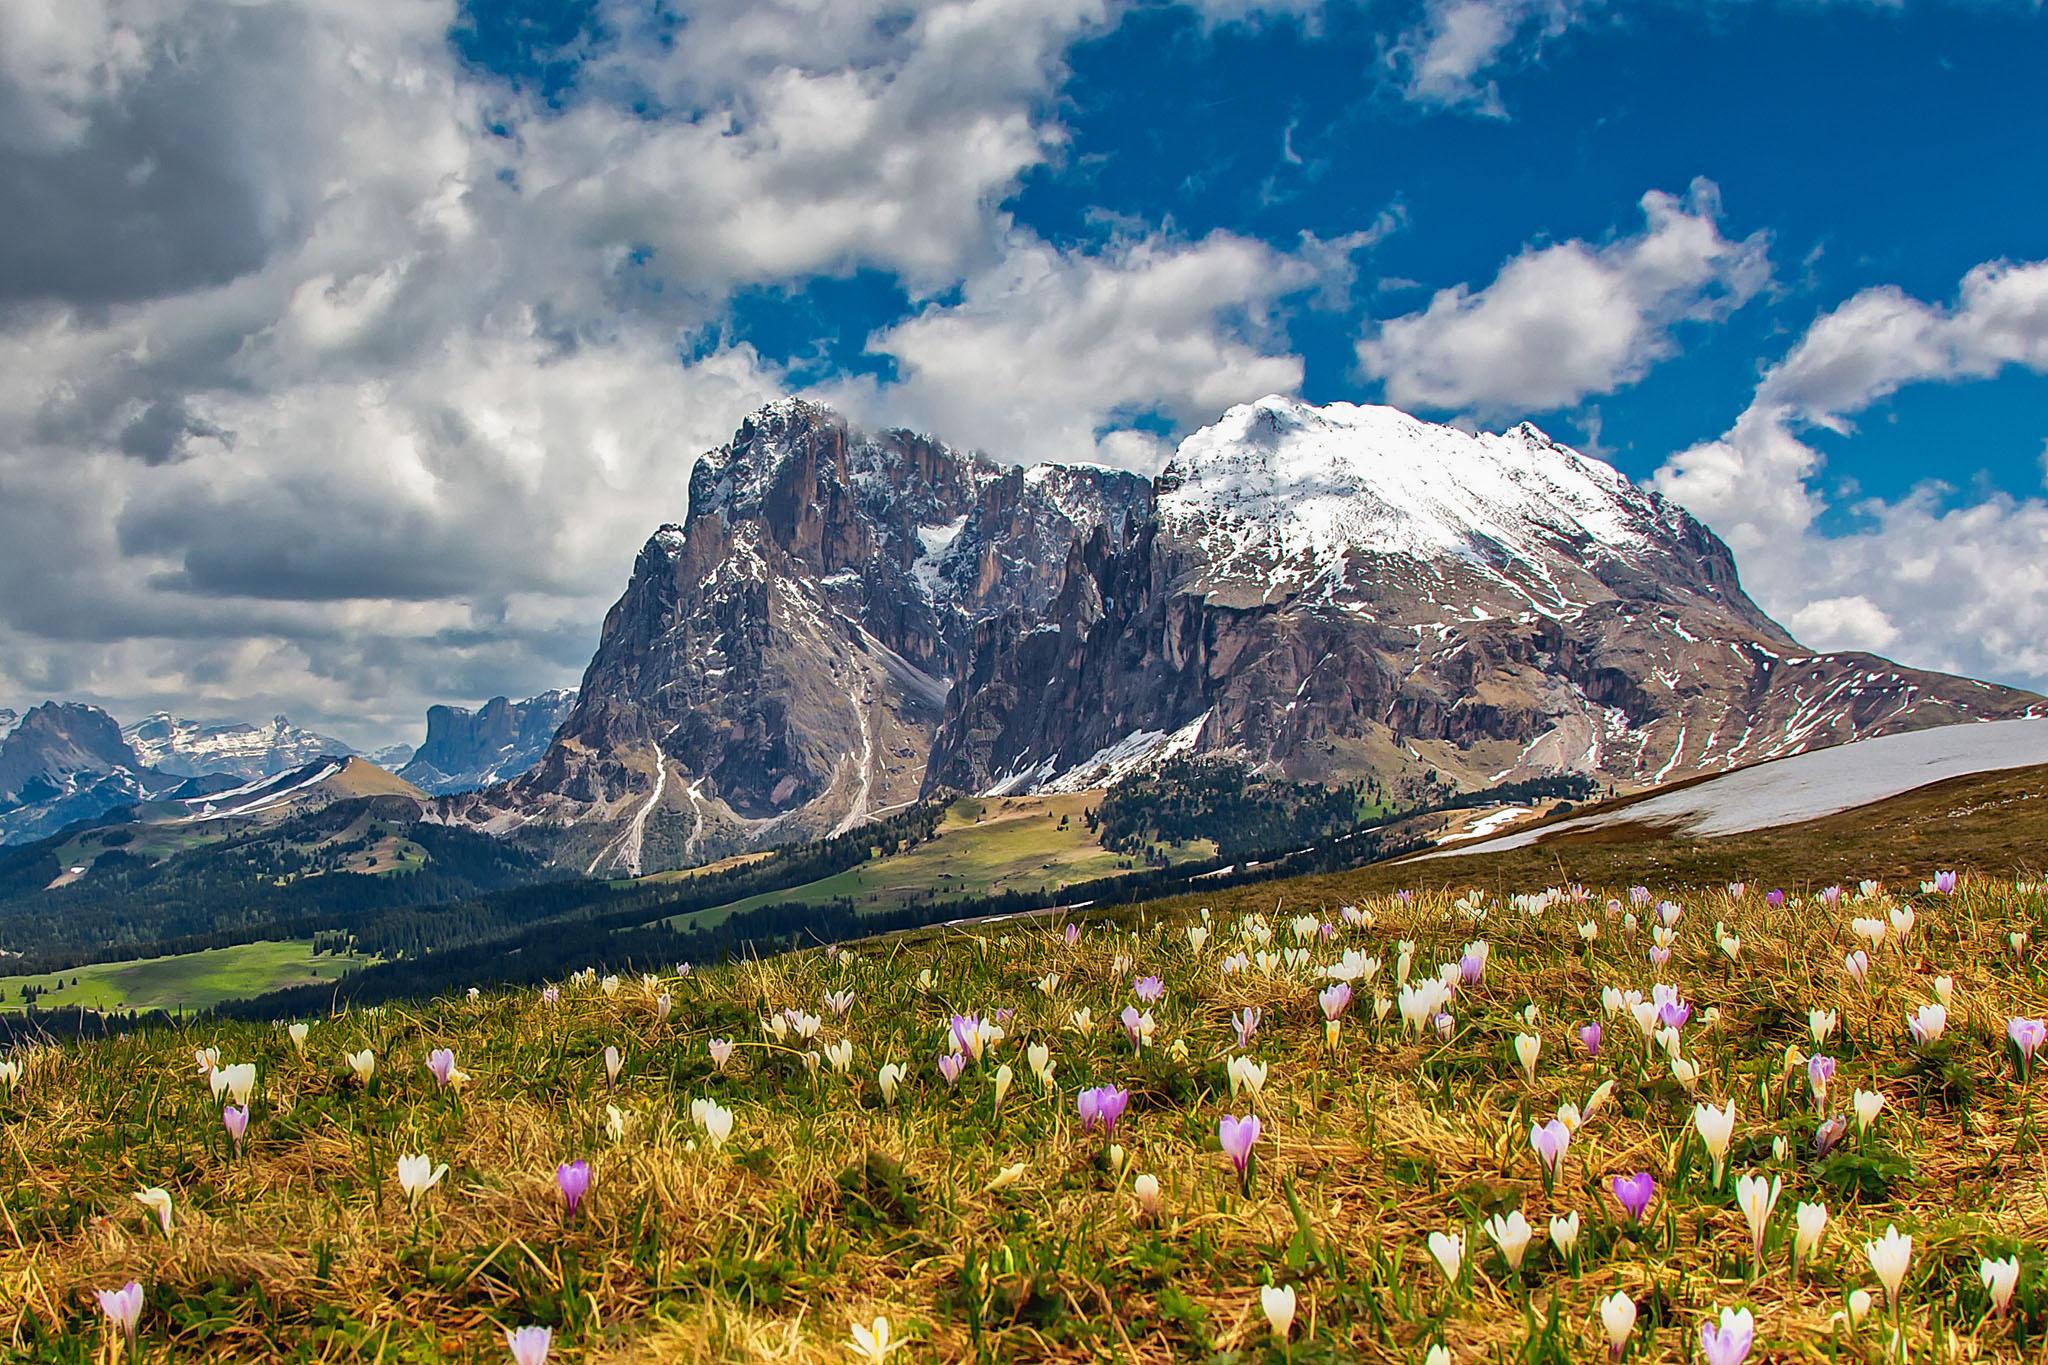 Mountainside Flowers at Dolomites, Italy HD Wallpaper. Background